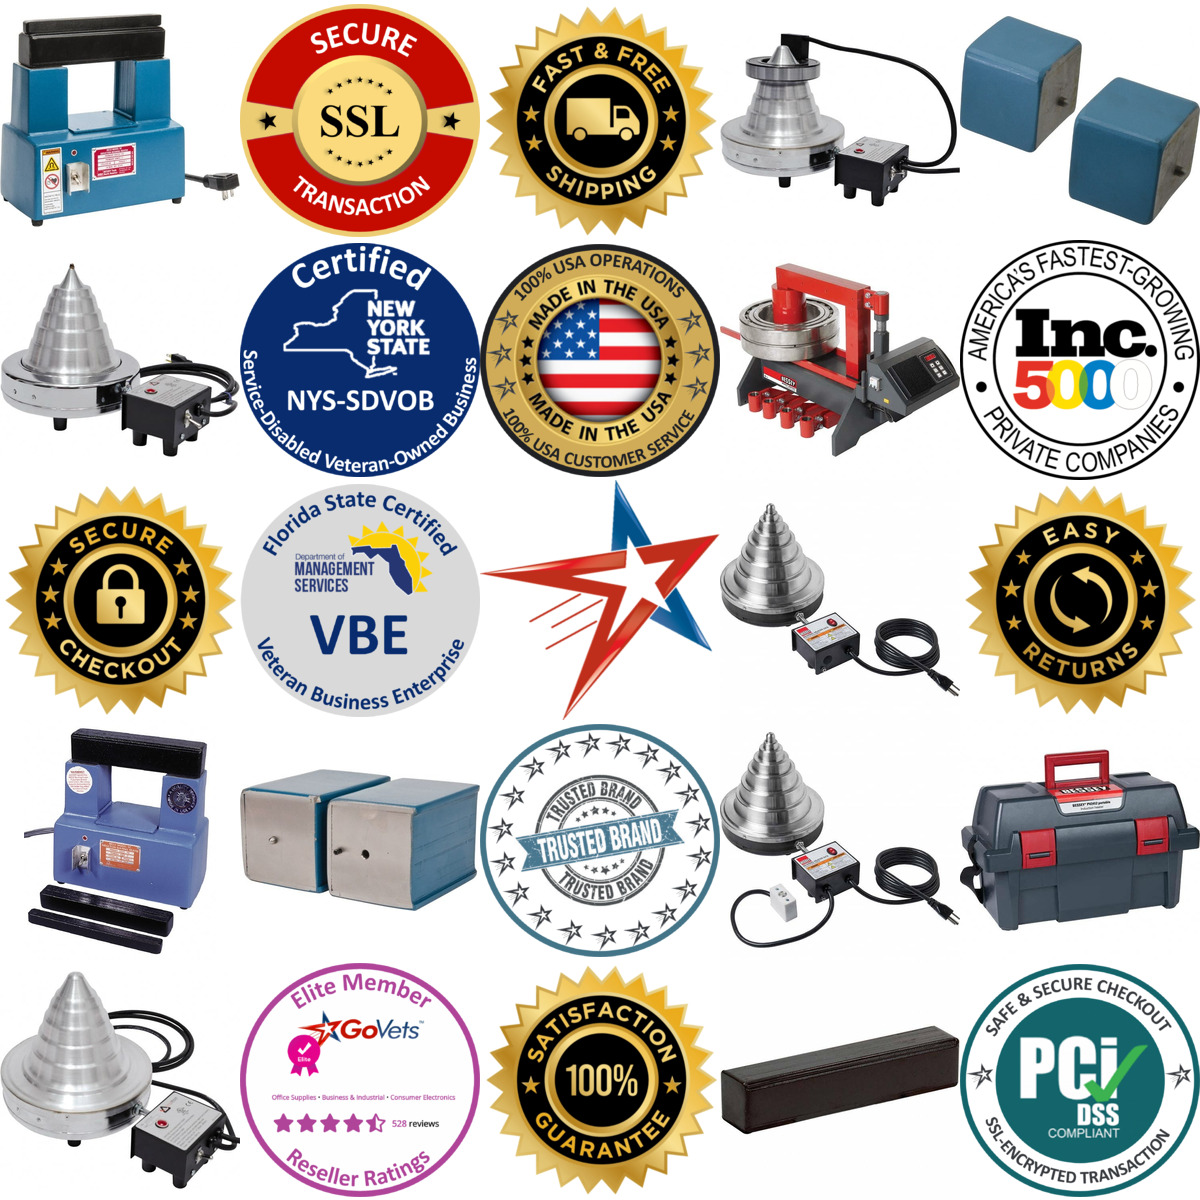 A selection of Bearing Heaters products on GoVets